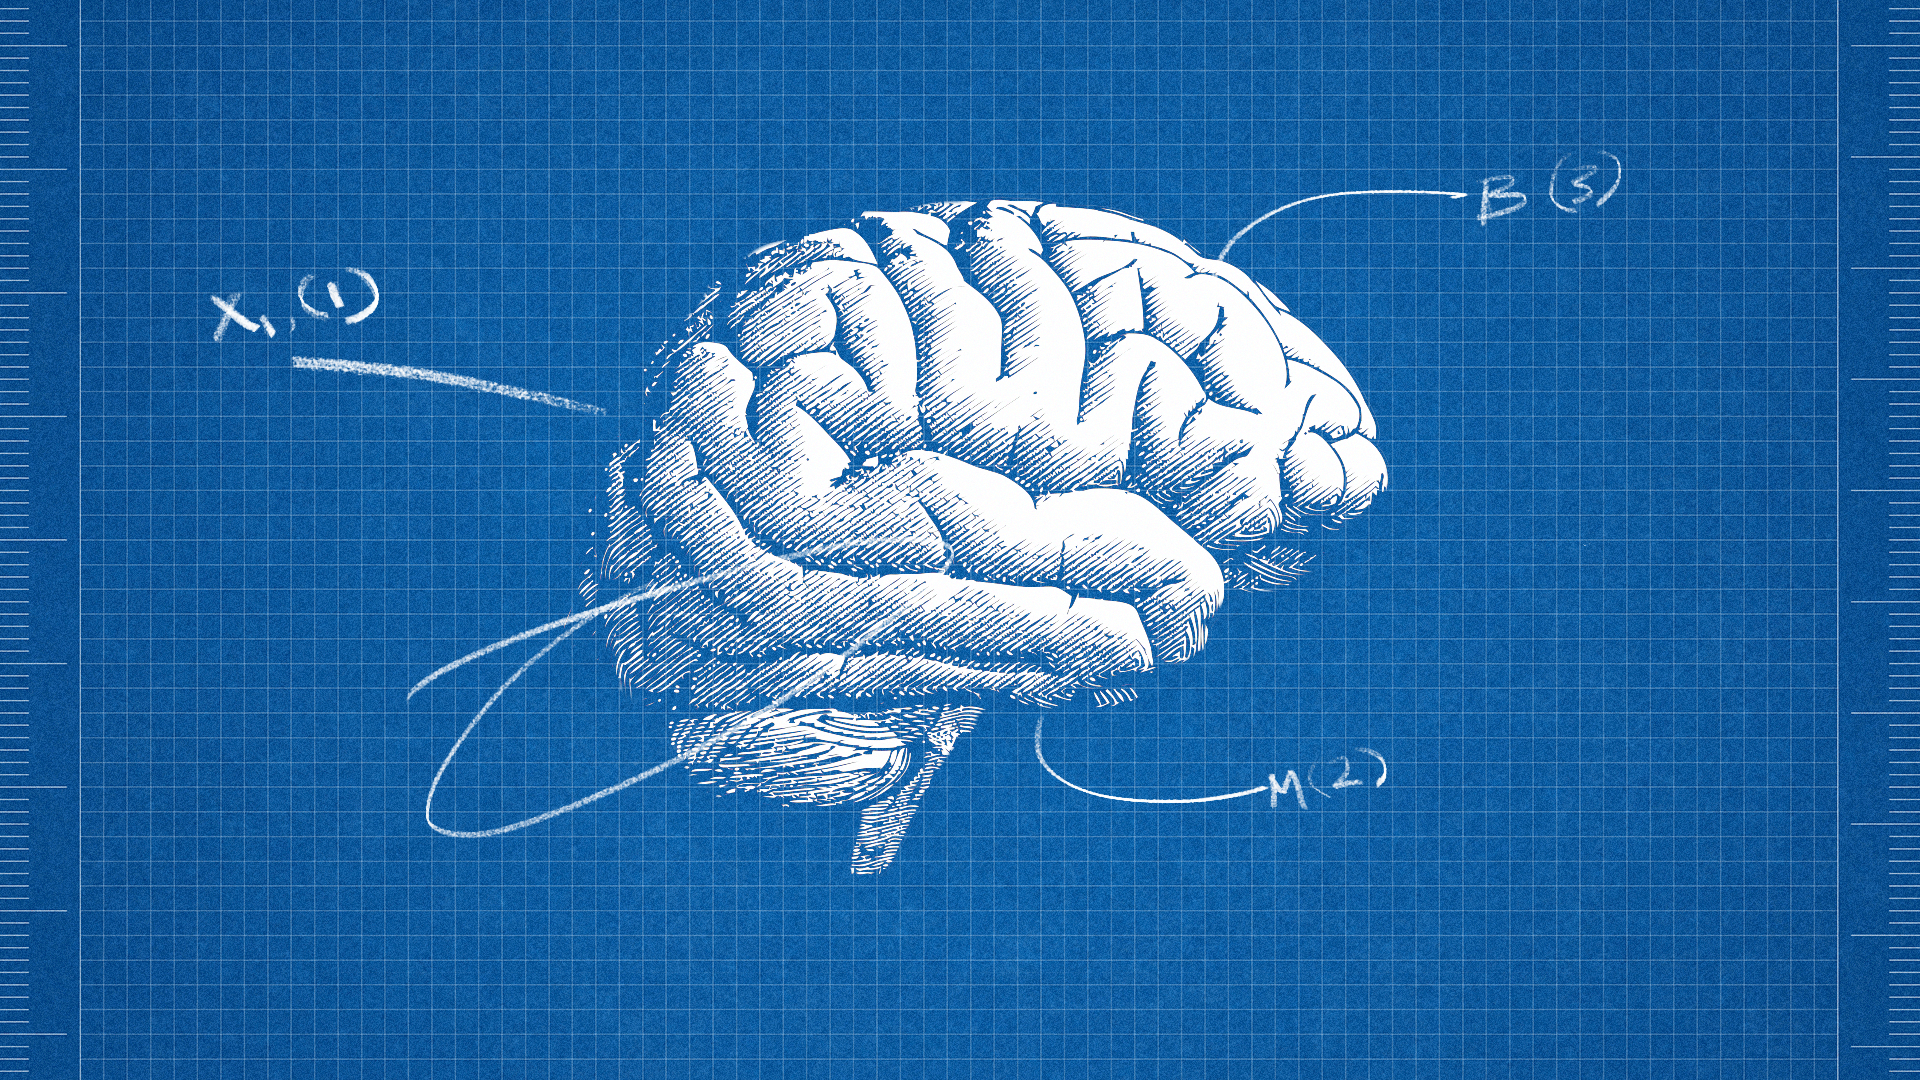 Illustration of a brain on blueprint paper with various areas called out.